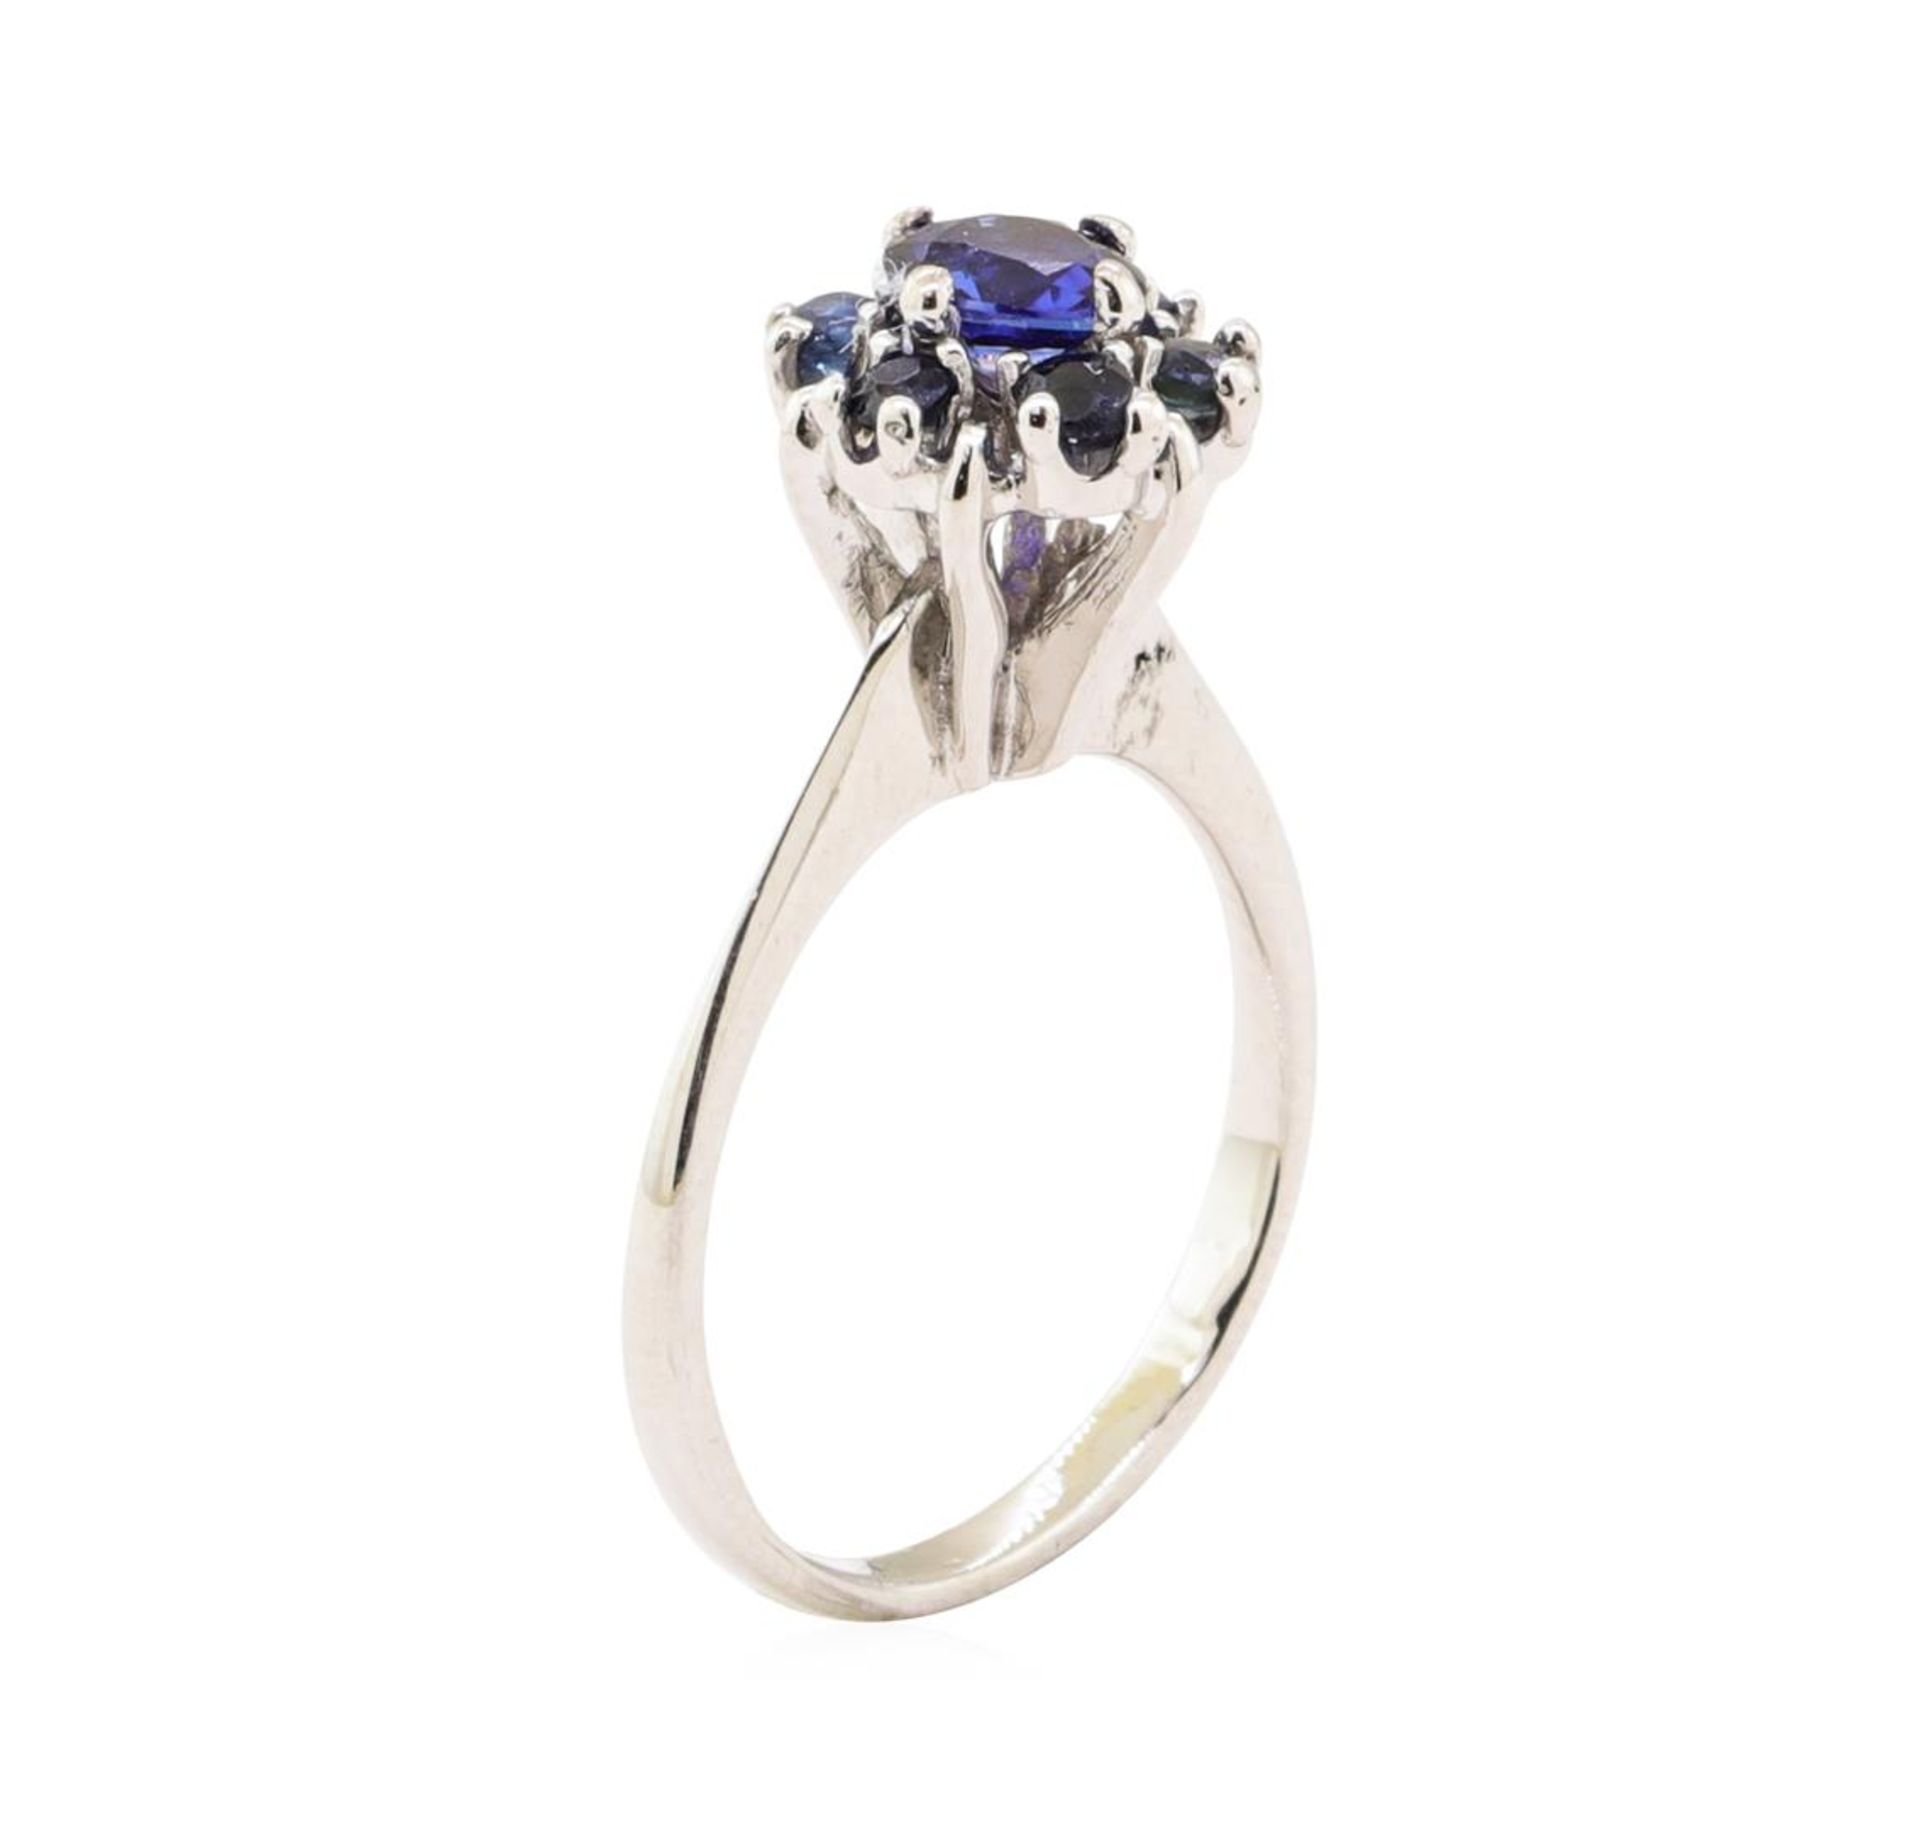 0.67ctw Blue Sapphire Ring - 14KT White Gold - Image 4 of 4